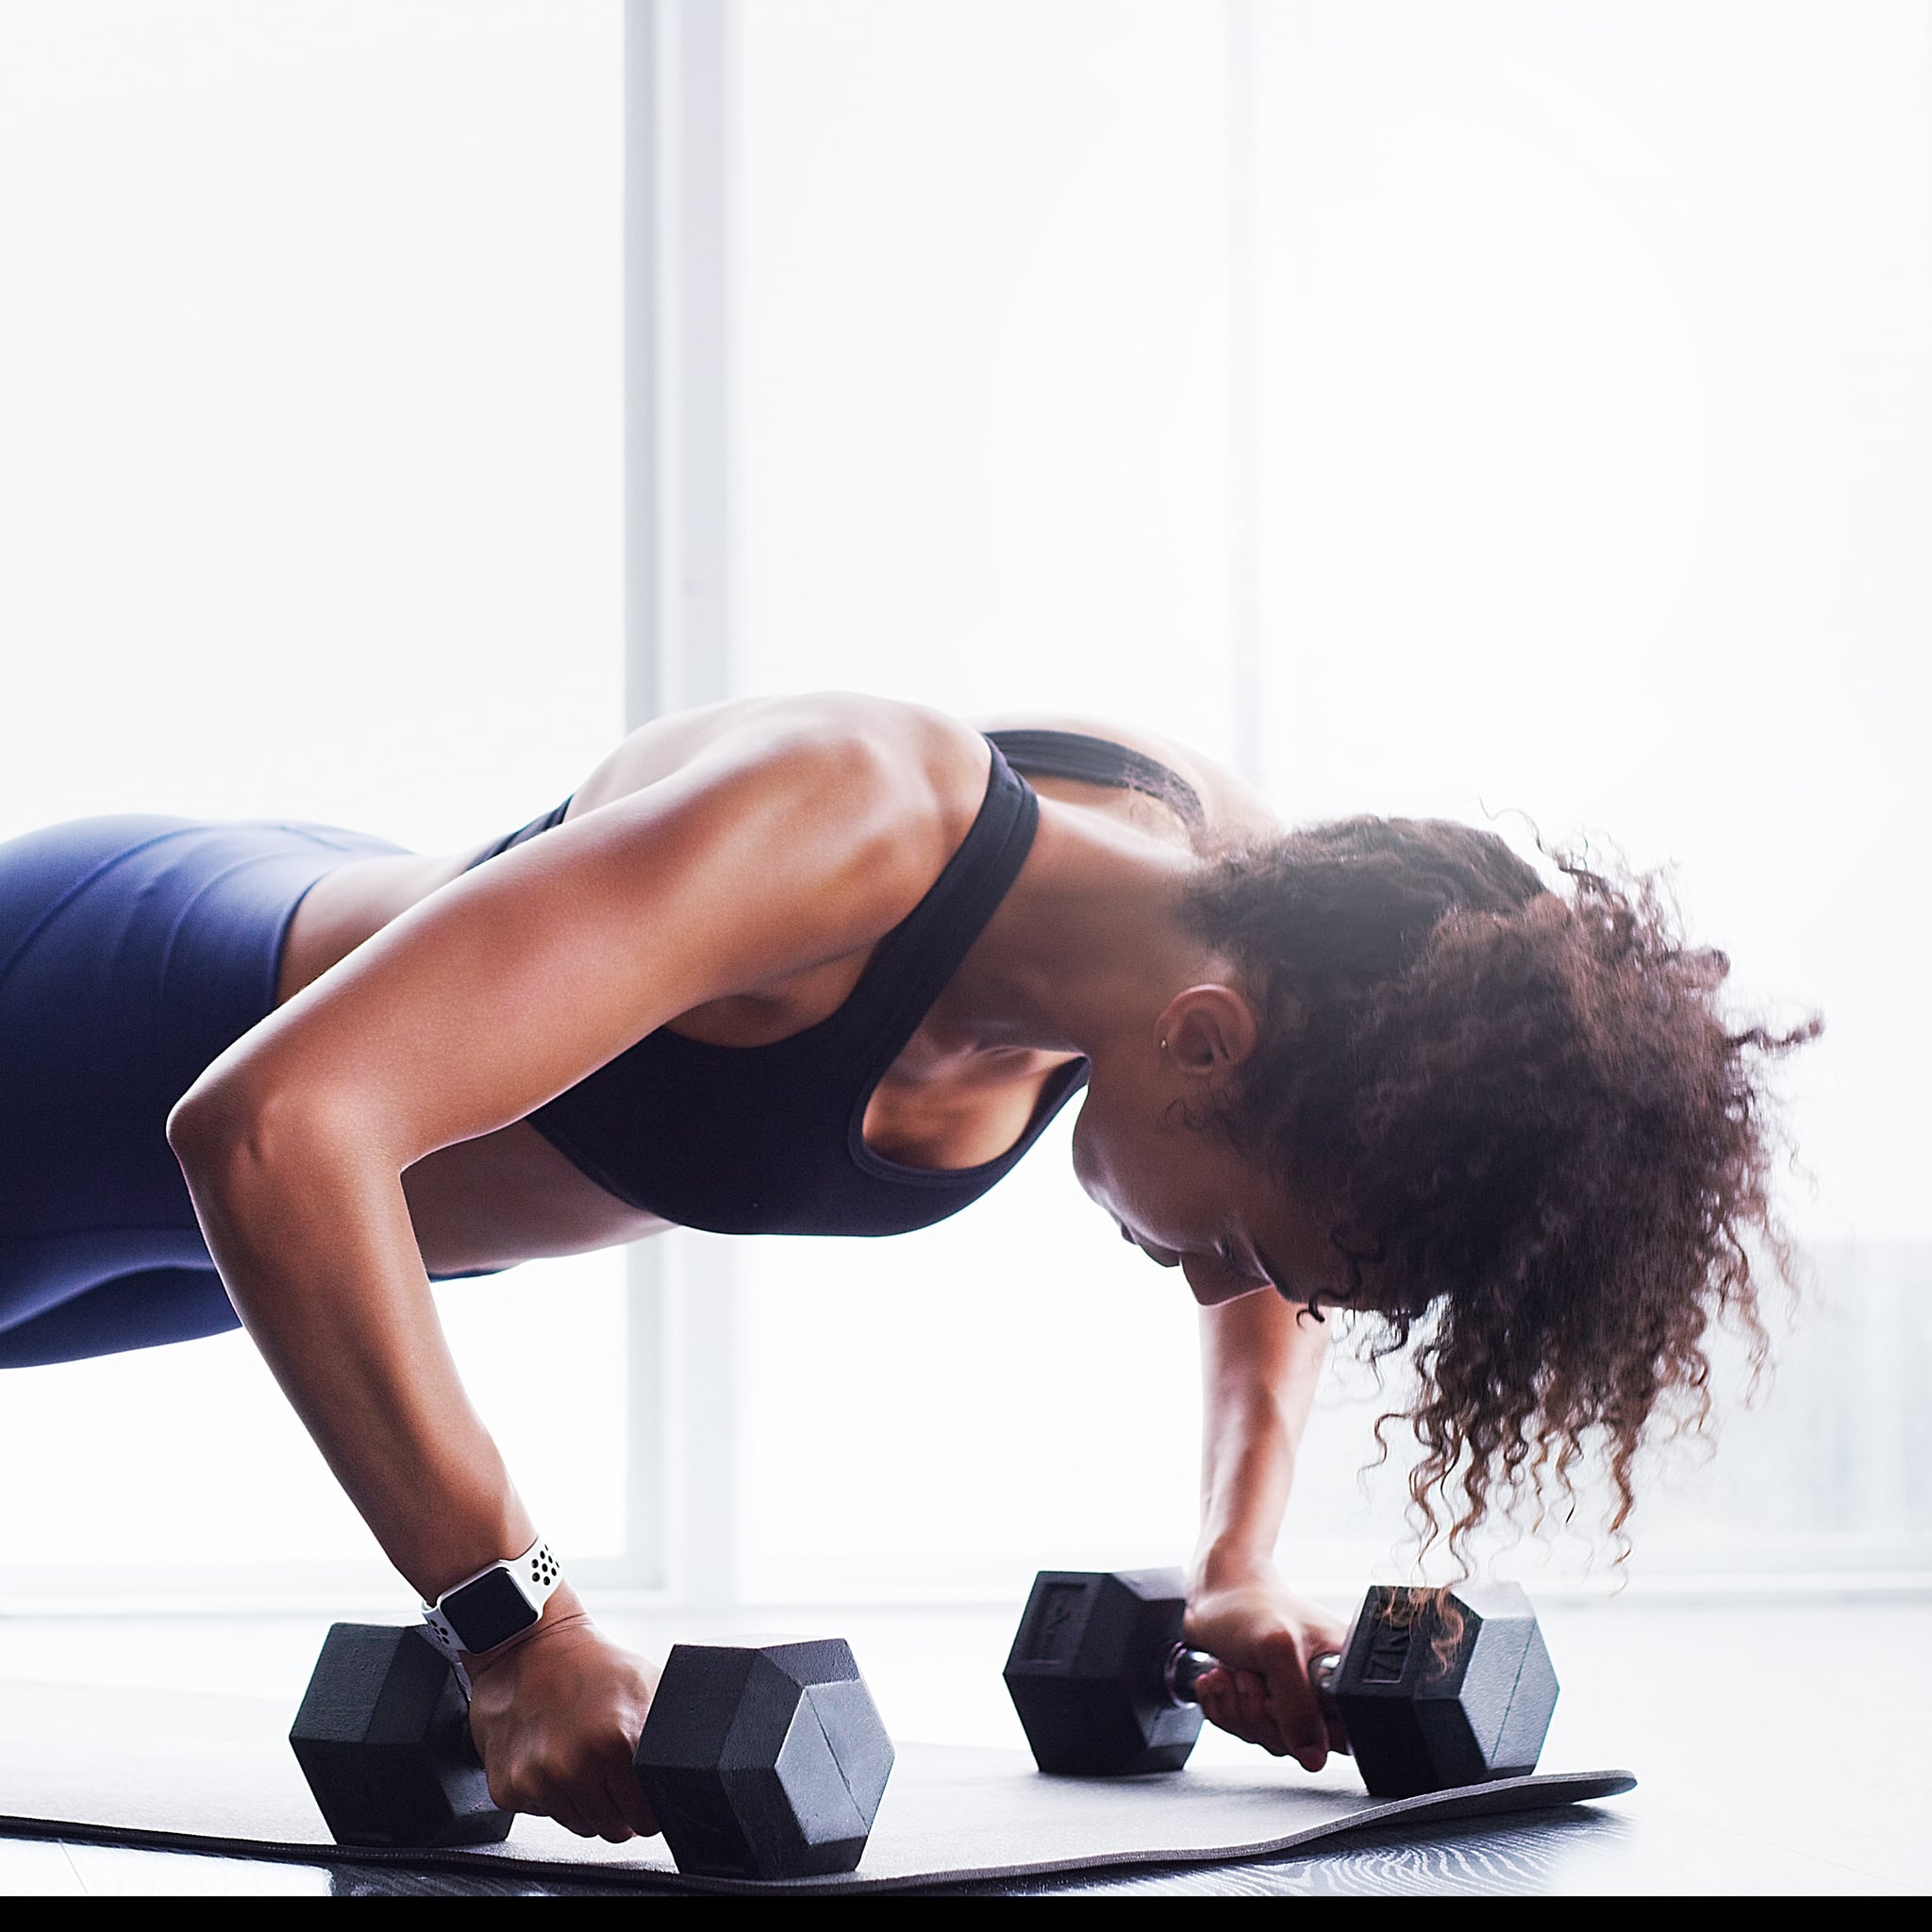 45-Minute Full-Body Strength Workout With Weights